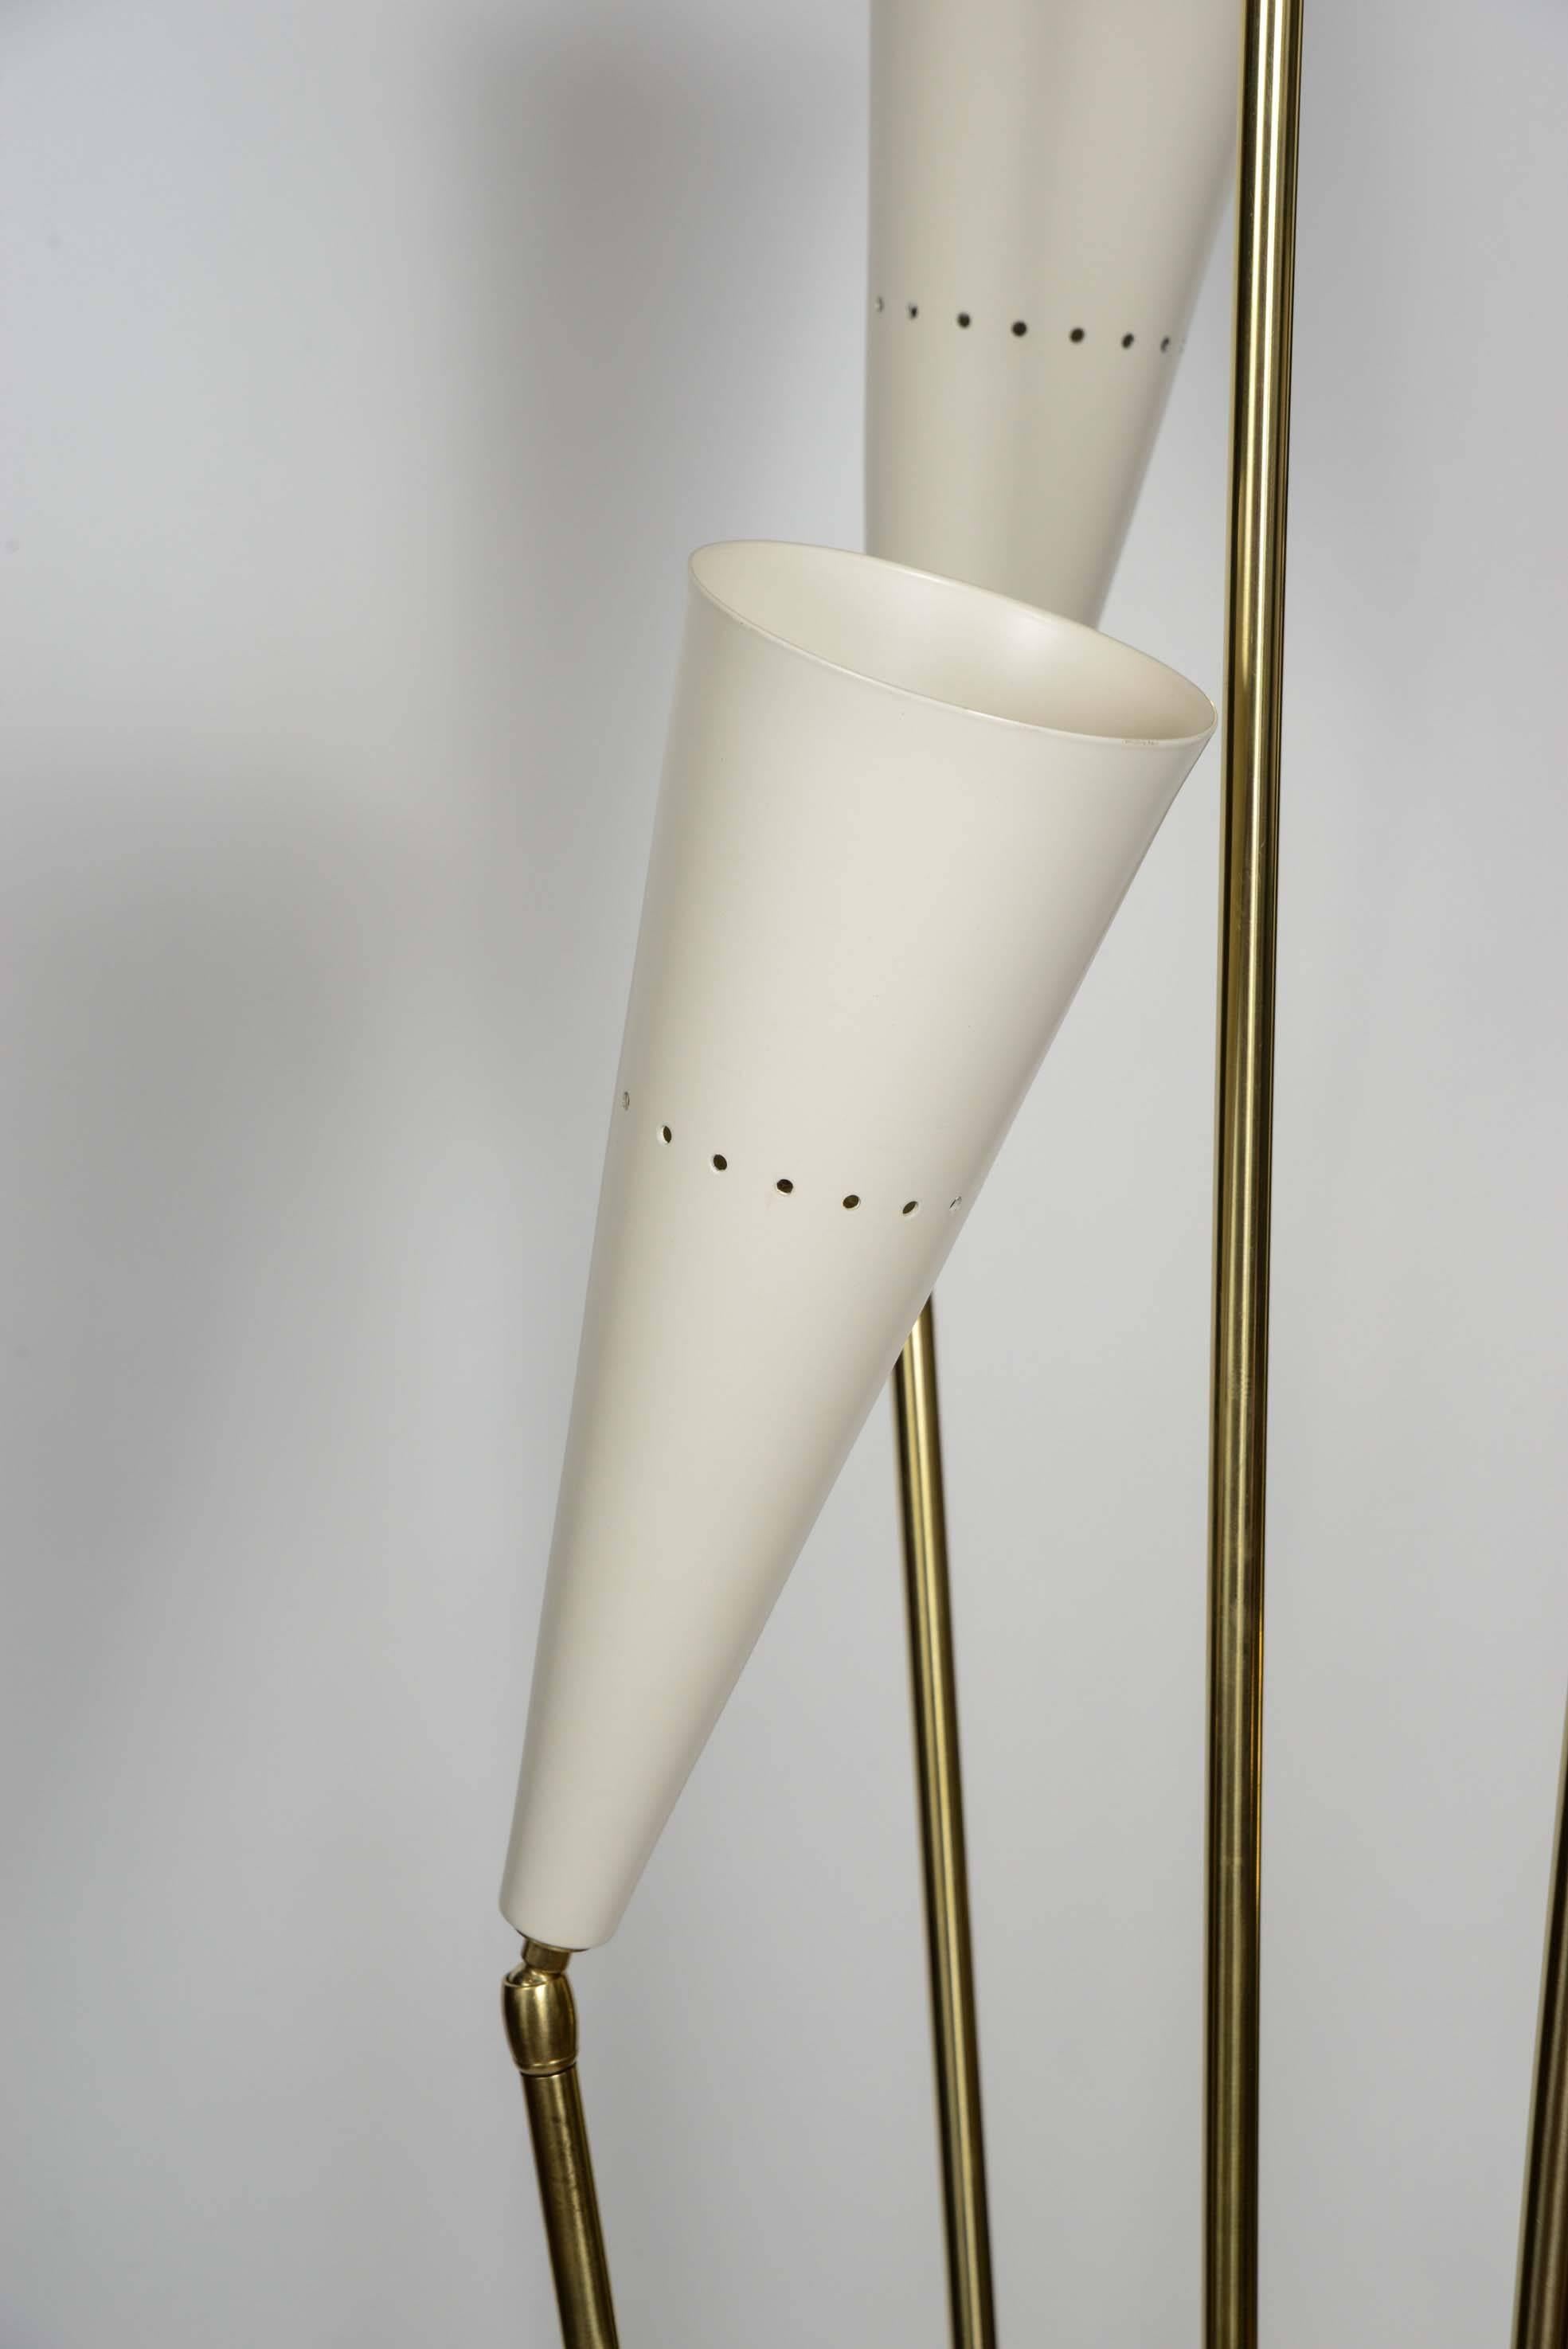 Amazing floor lamp made of a travertine foot, five brass arms ended by rotative white enameled cones.

Designed and created by the artist Diego Mardegan for Galerie Glustin Luminaires.

Signed on one arm.